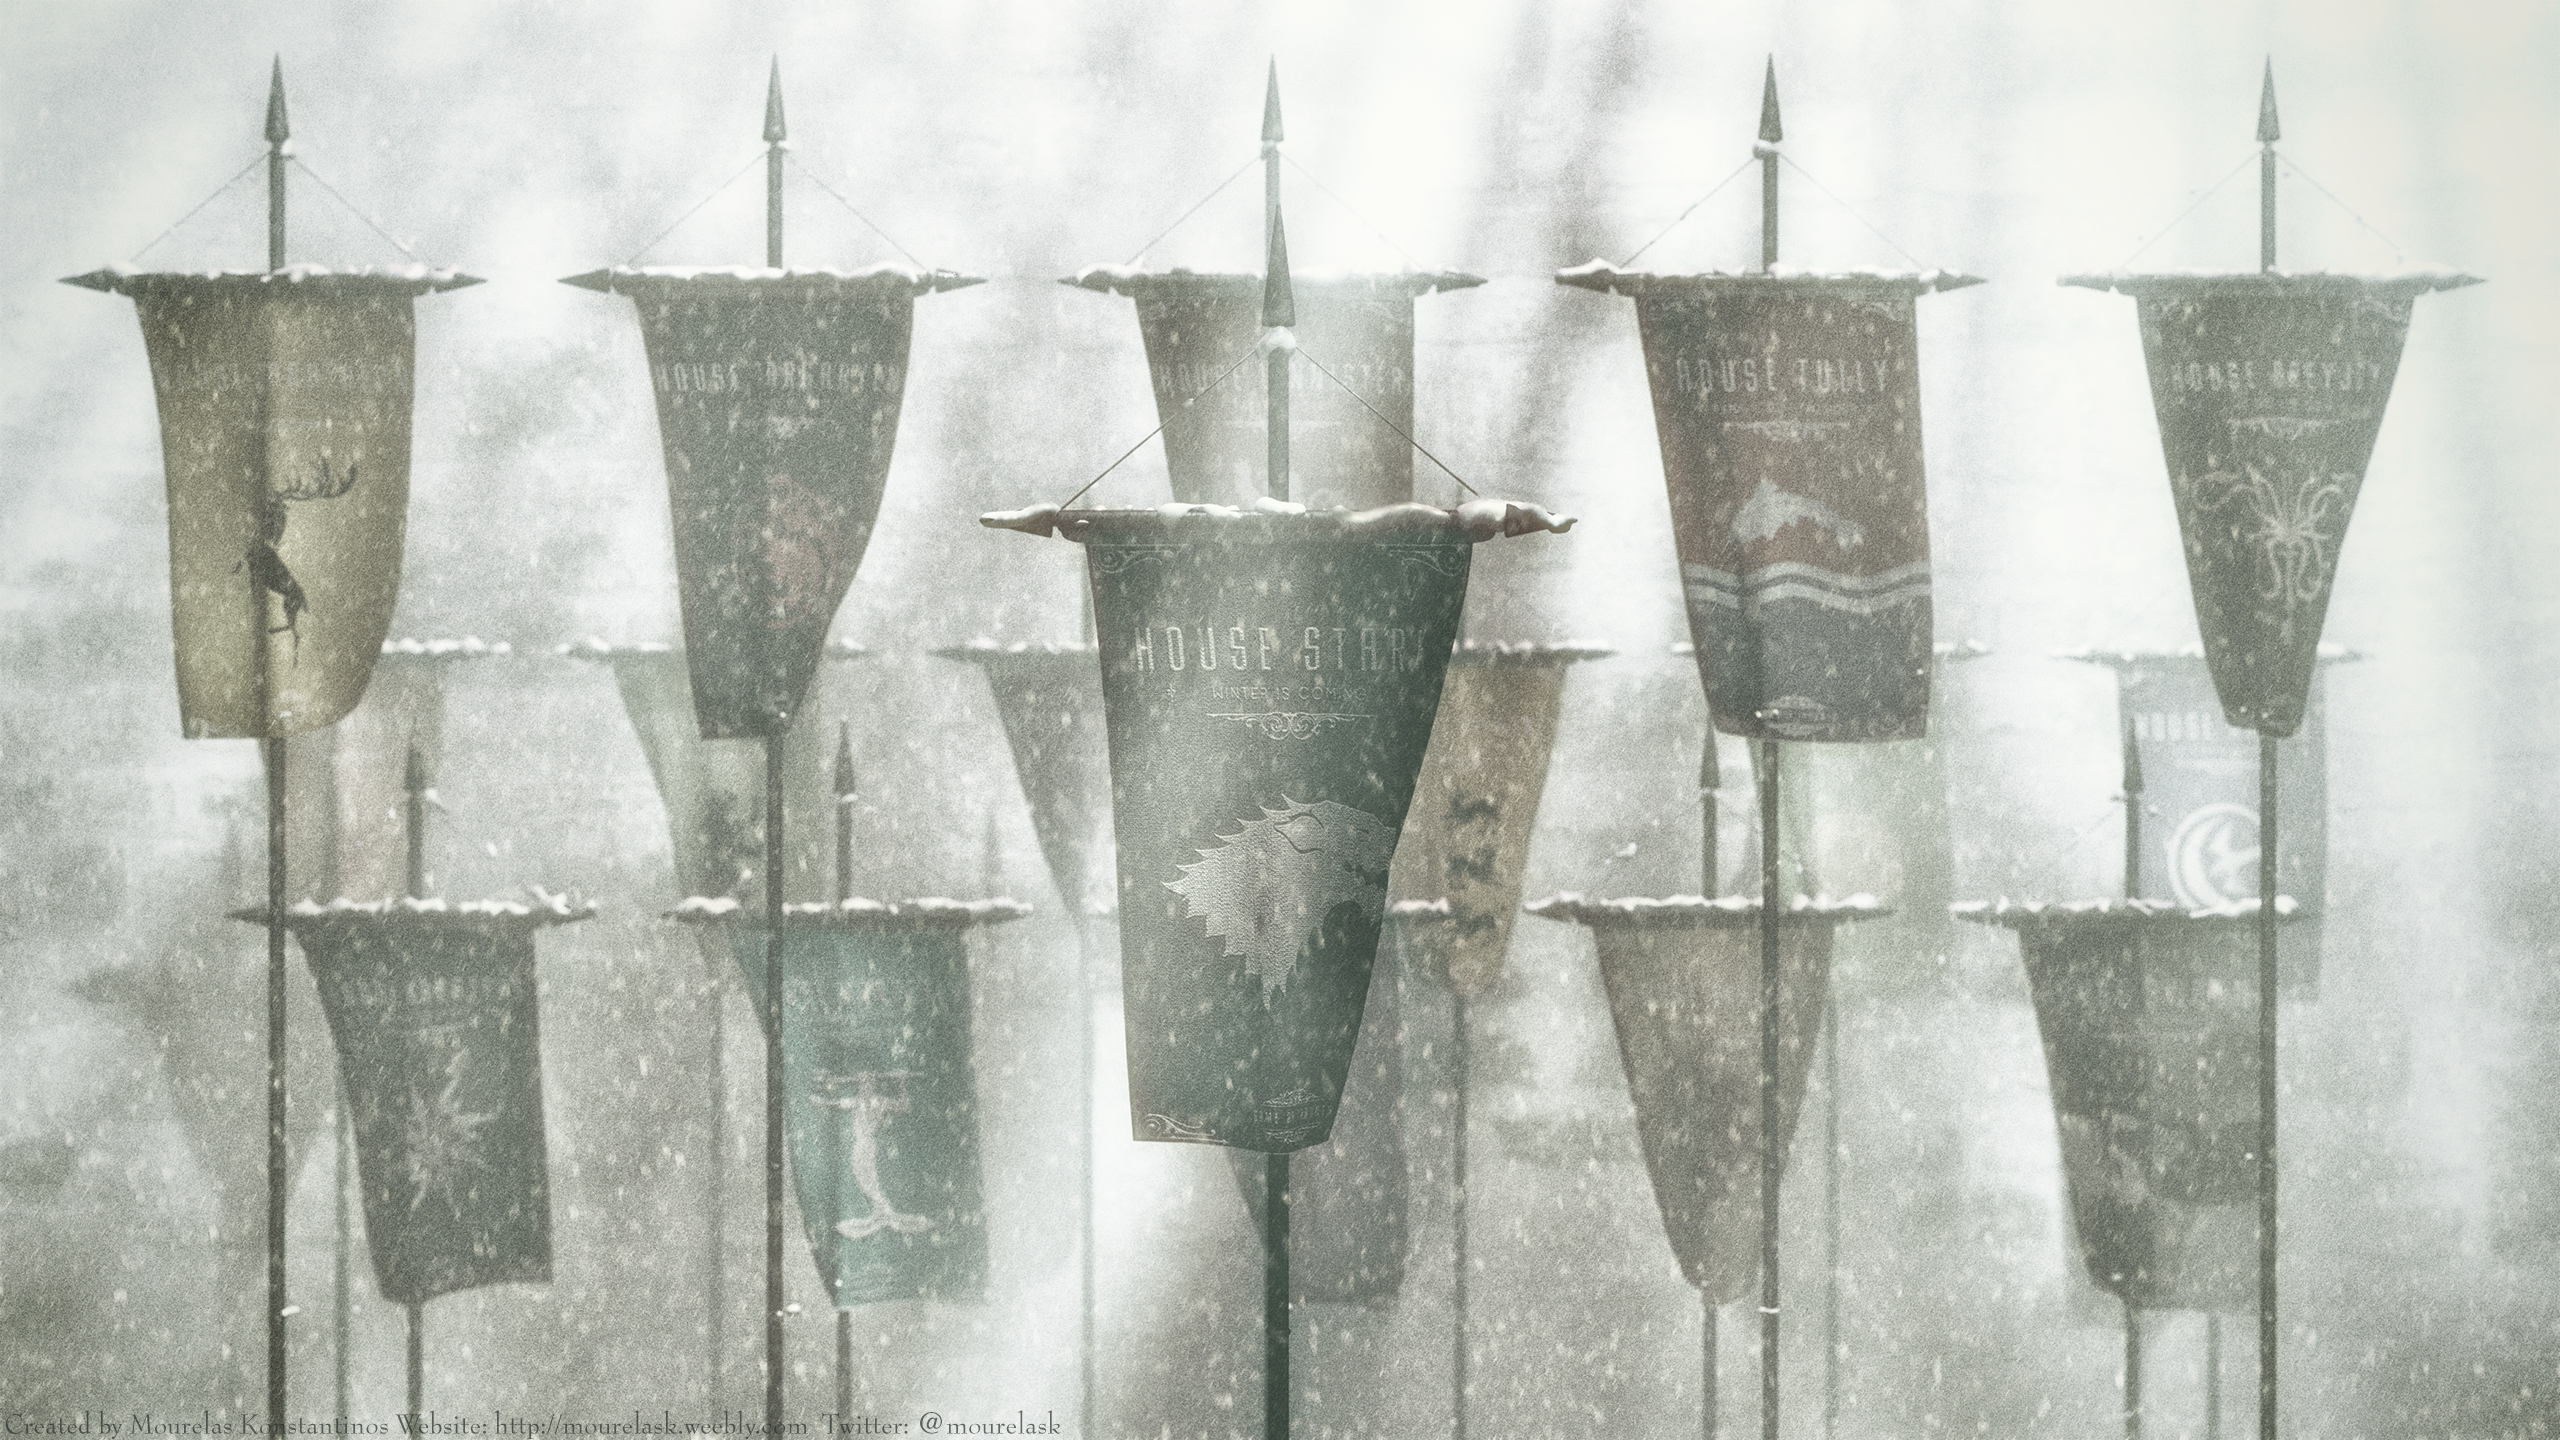 Game Of Thrones Banners Scene - HD Wallpaper 